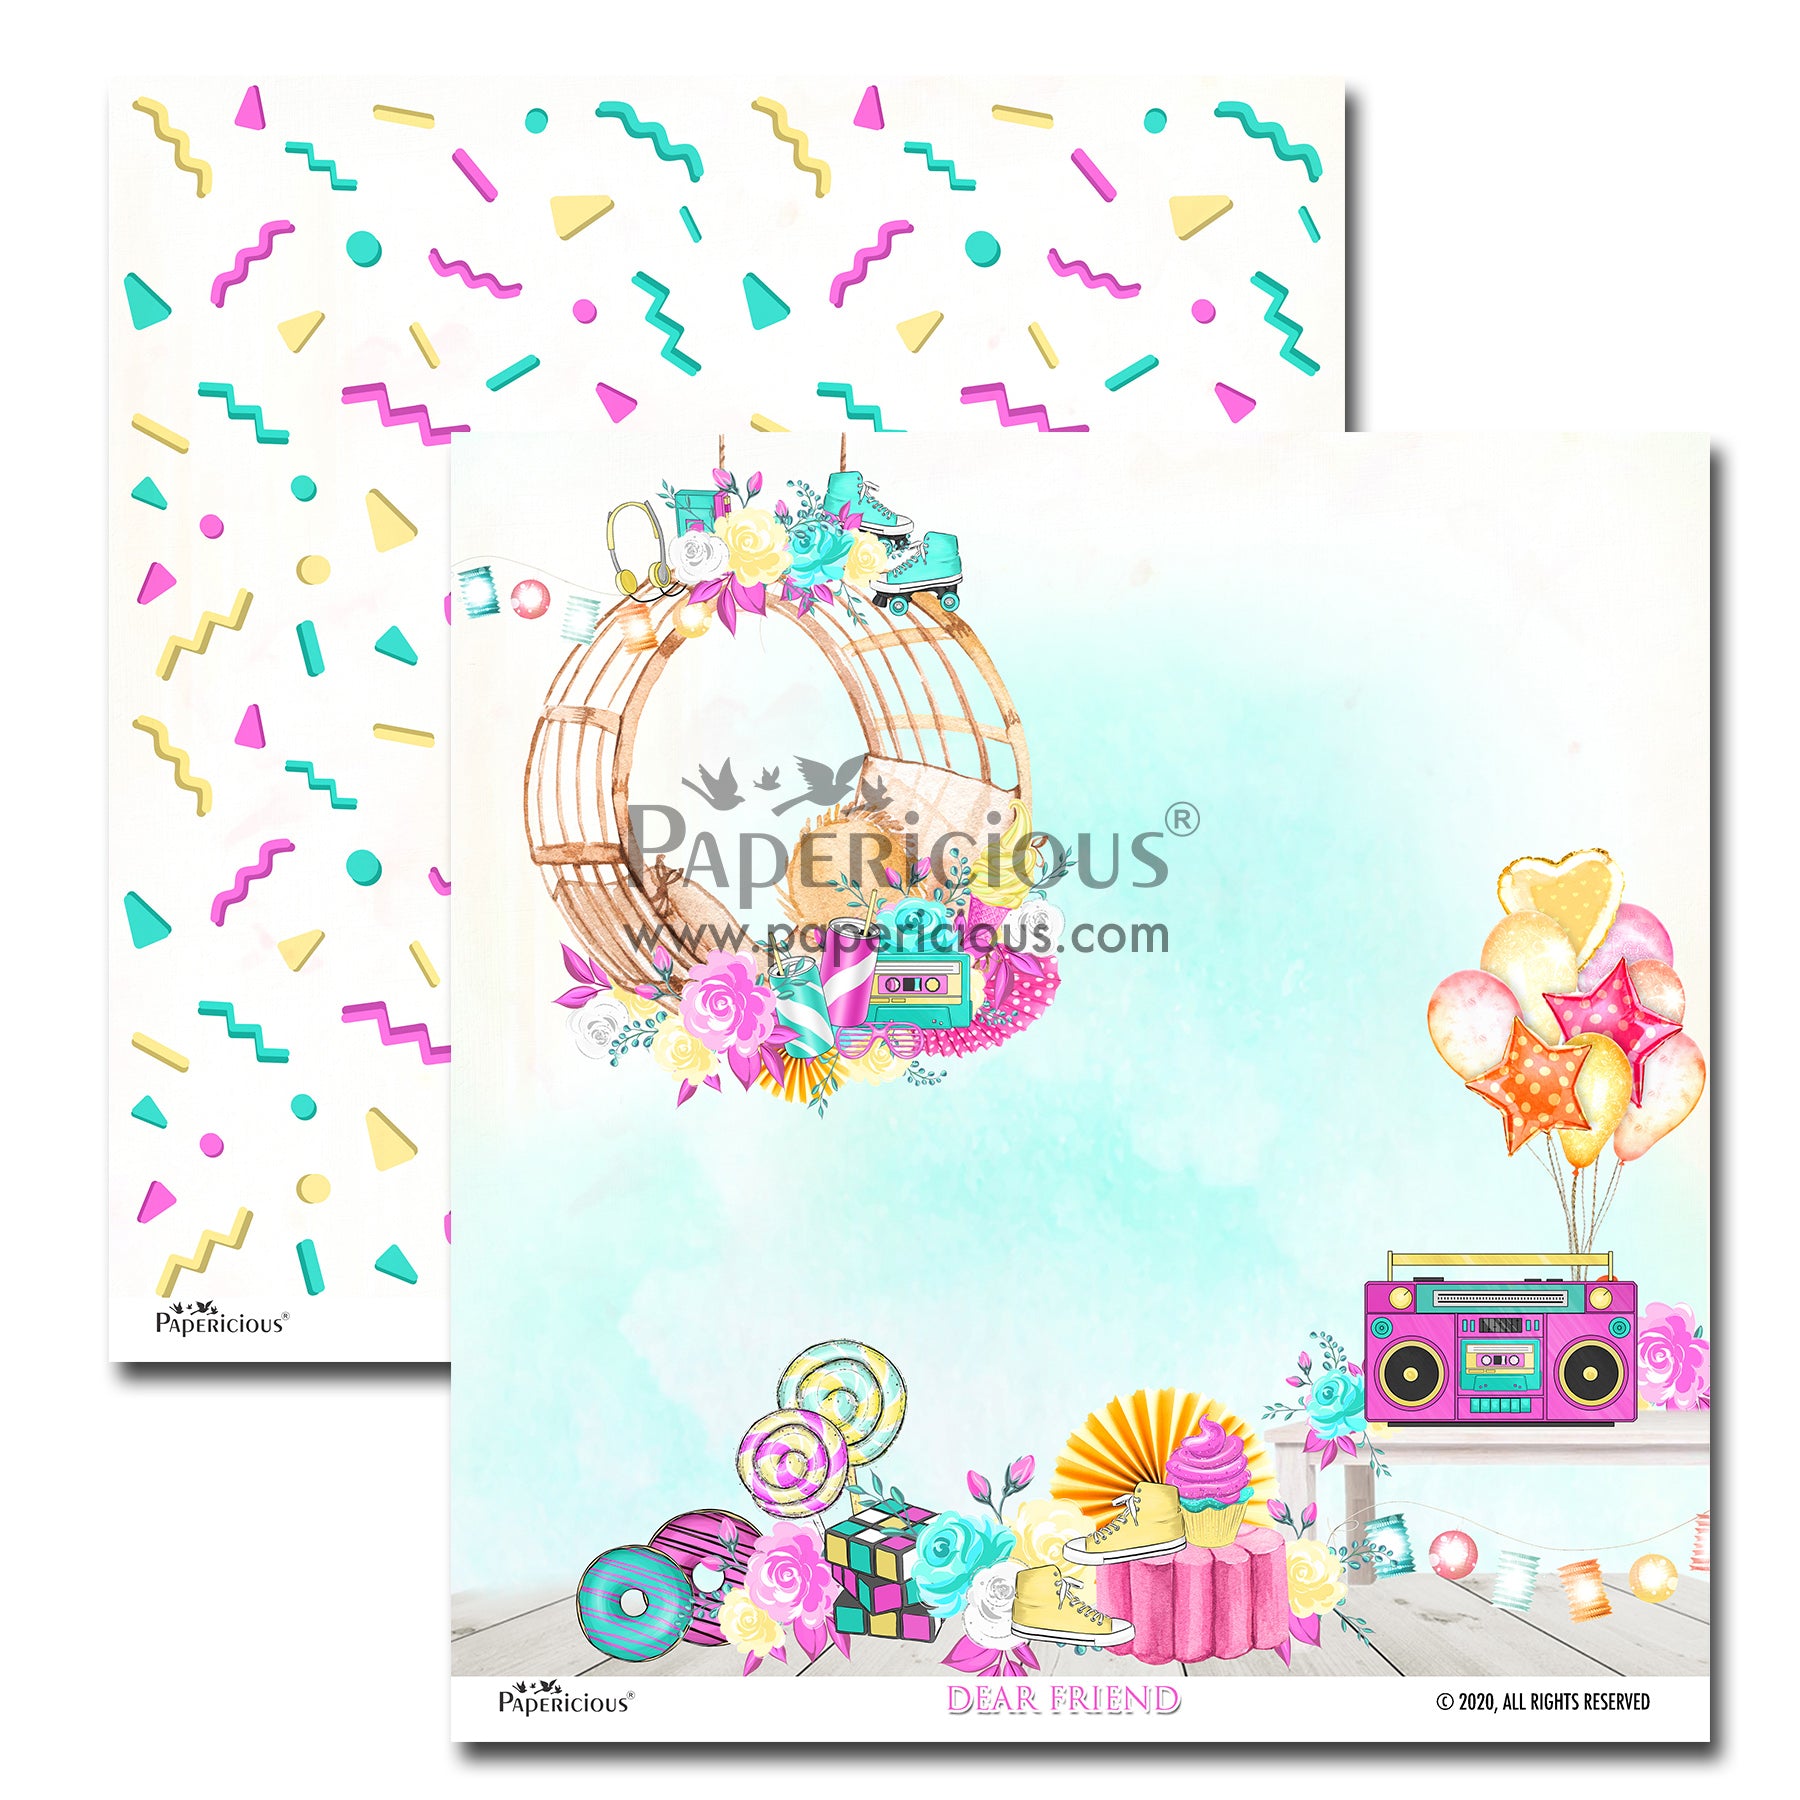 PAPERICIOUS - Dear Friend -  Designer Pattern Printed Scrapbook Papers 12x12 inch  / 20 sheets